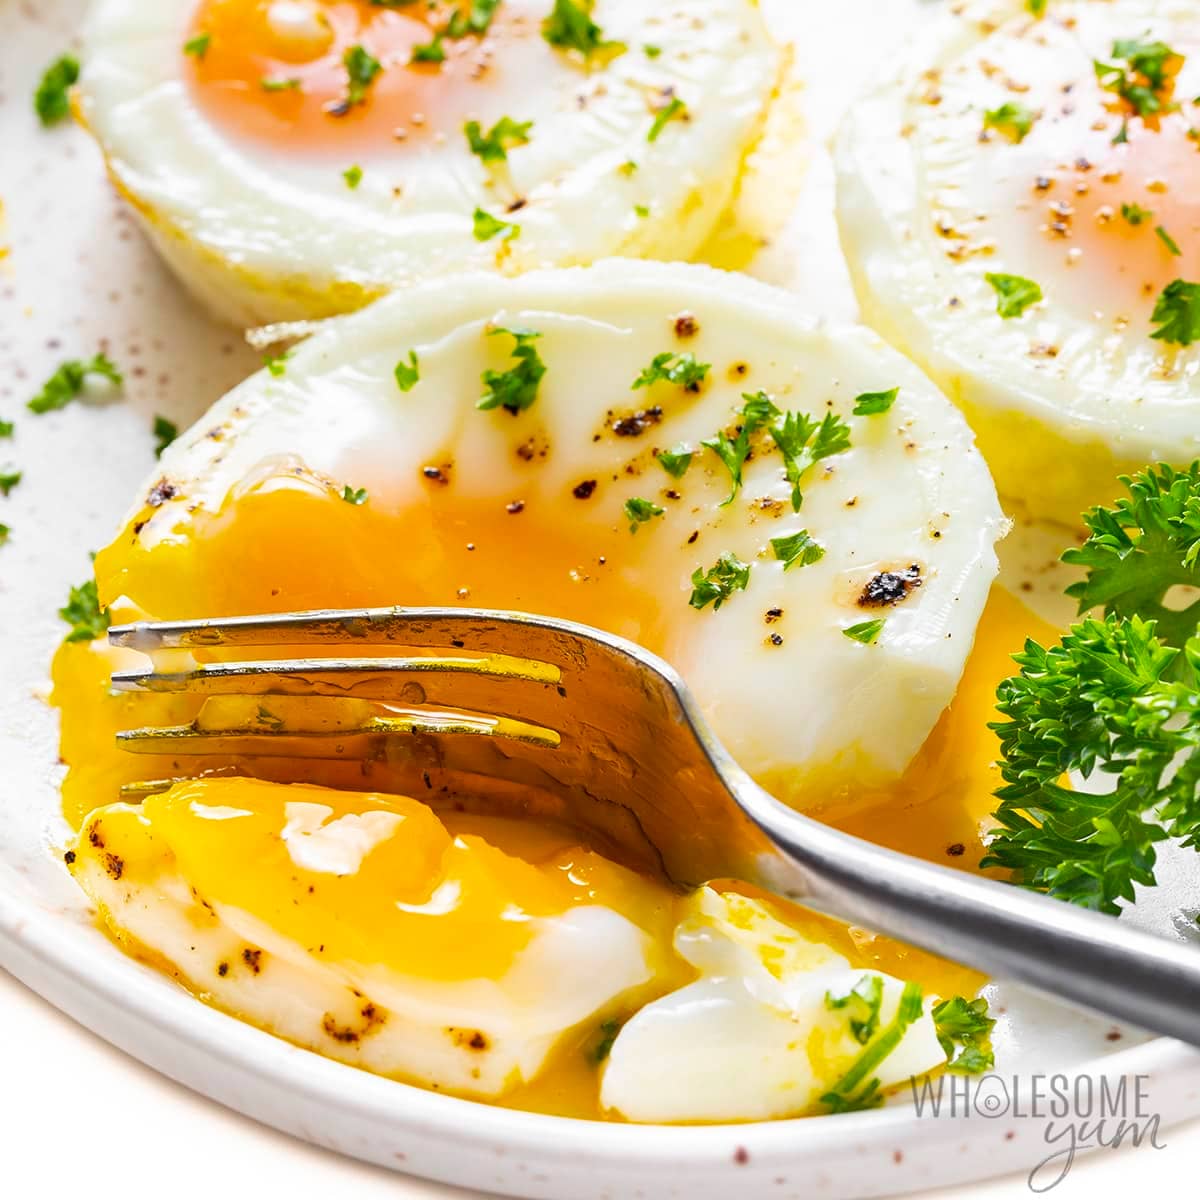 Oven baked eggs with runny yolk.